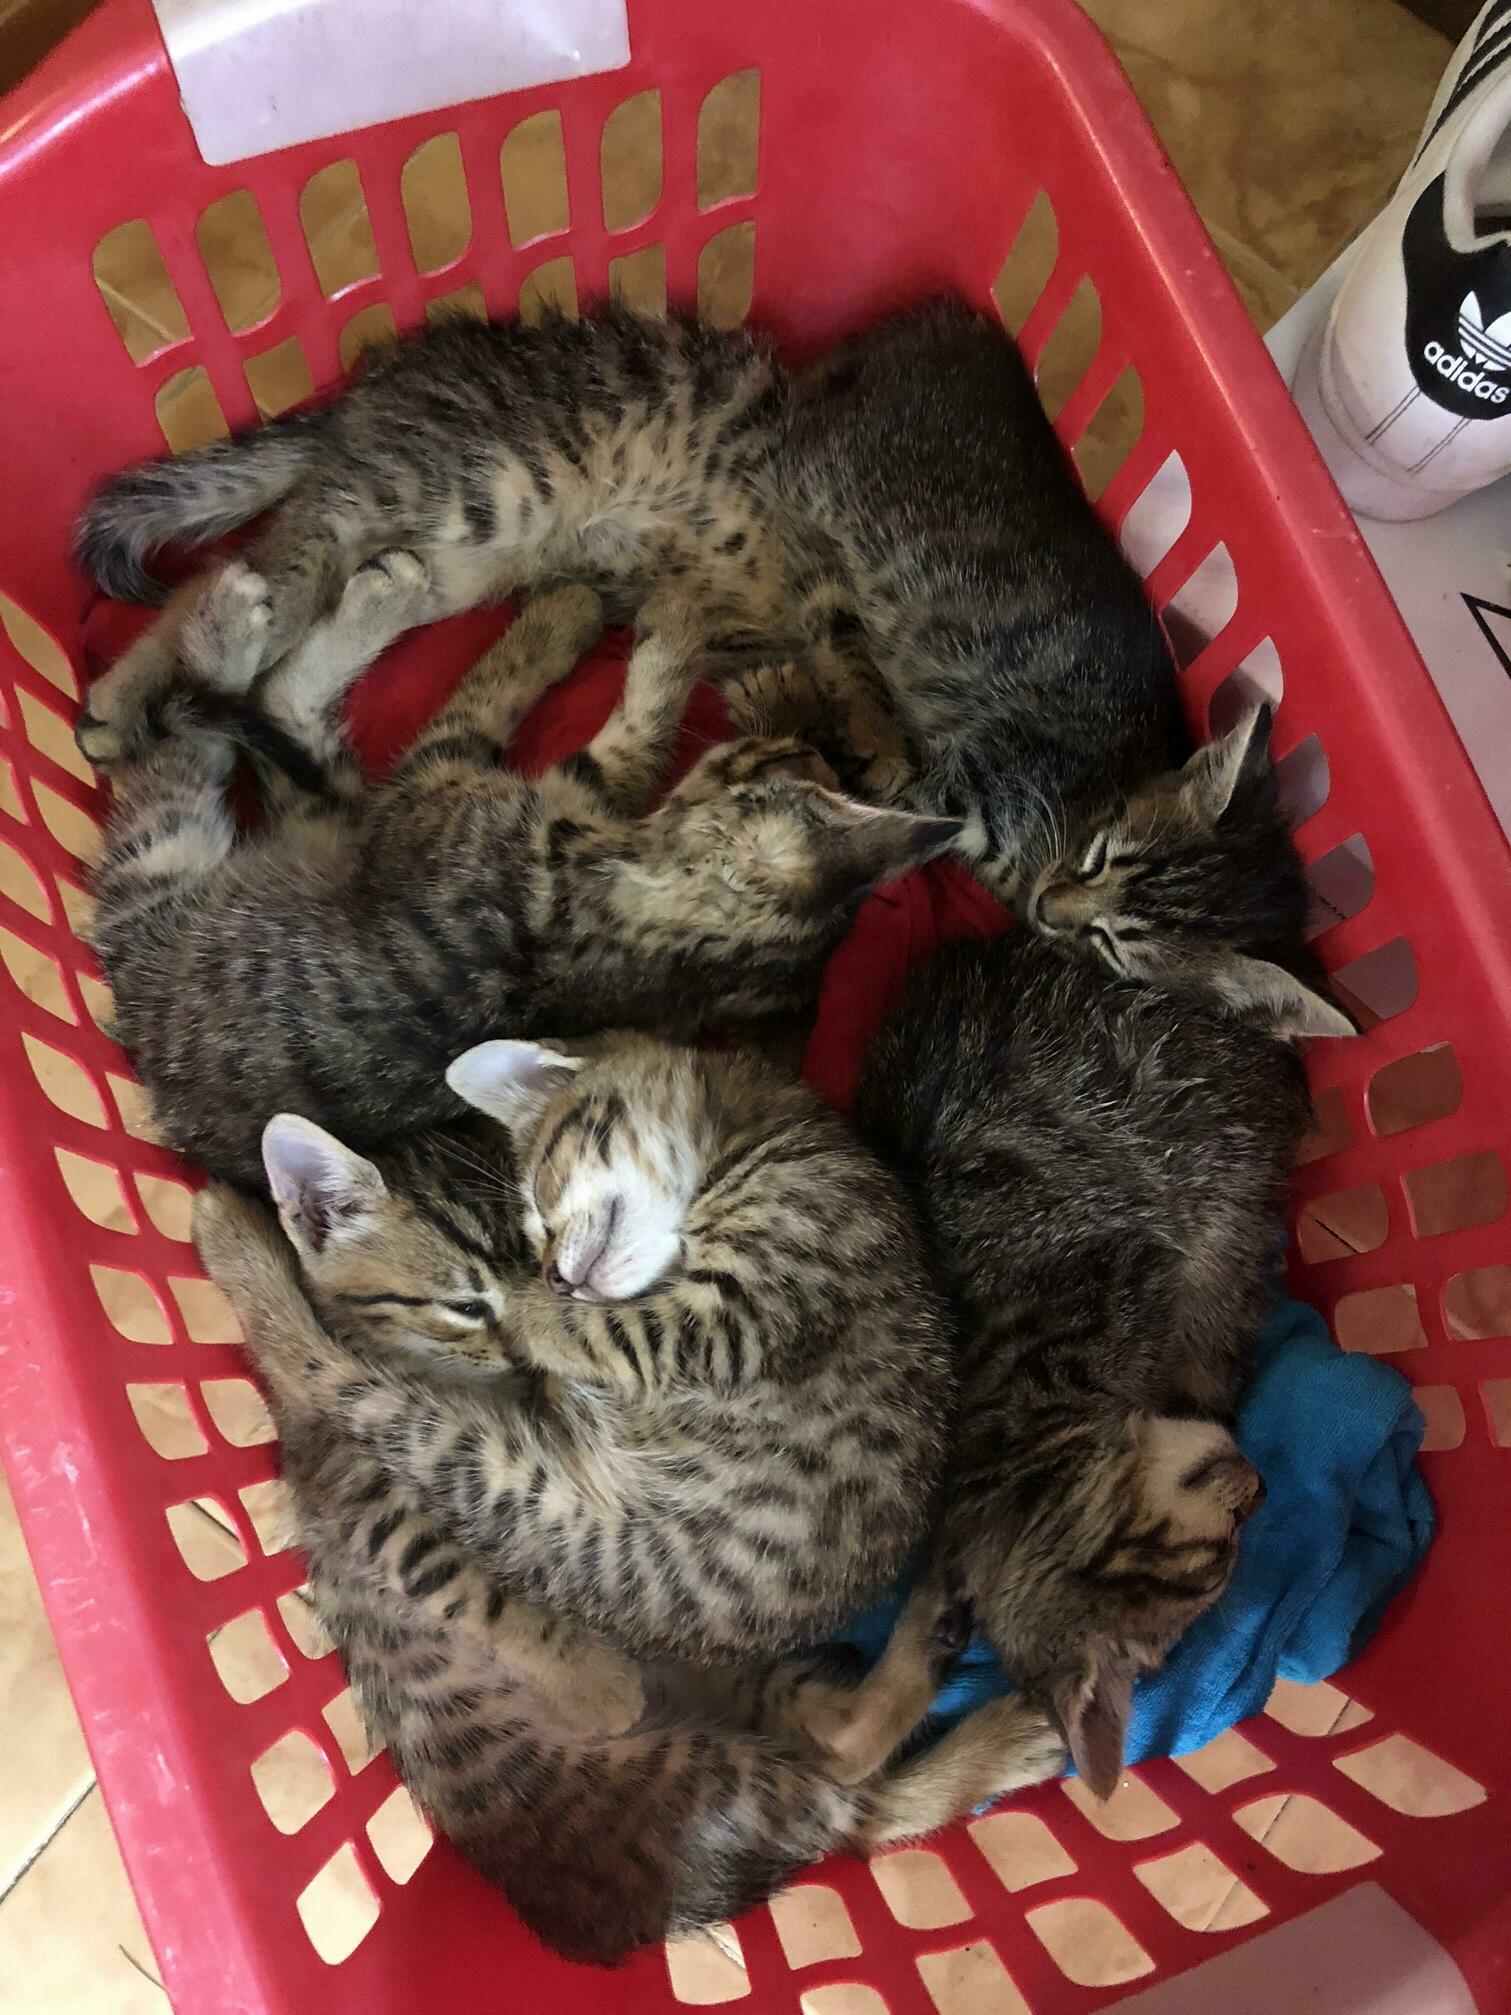 Whats better than sleeping in the laundry basket